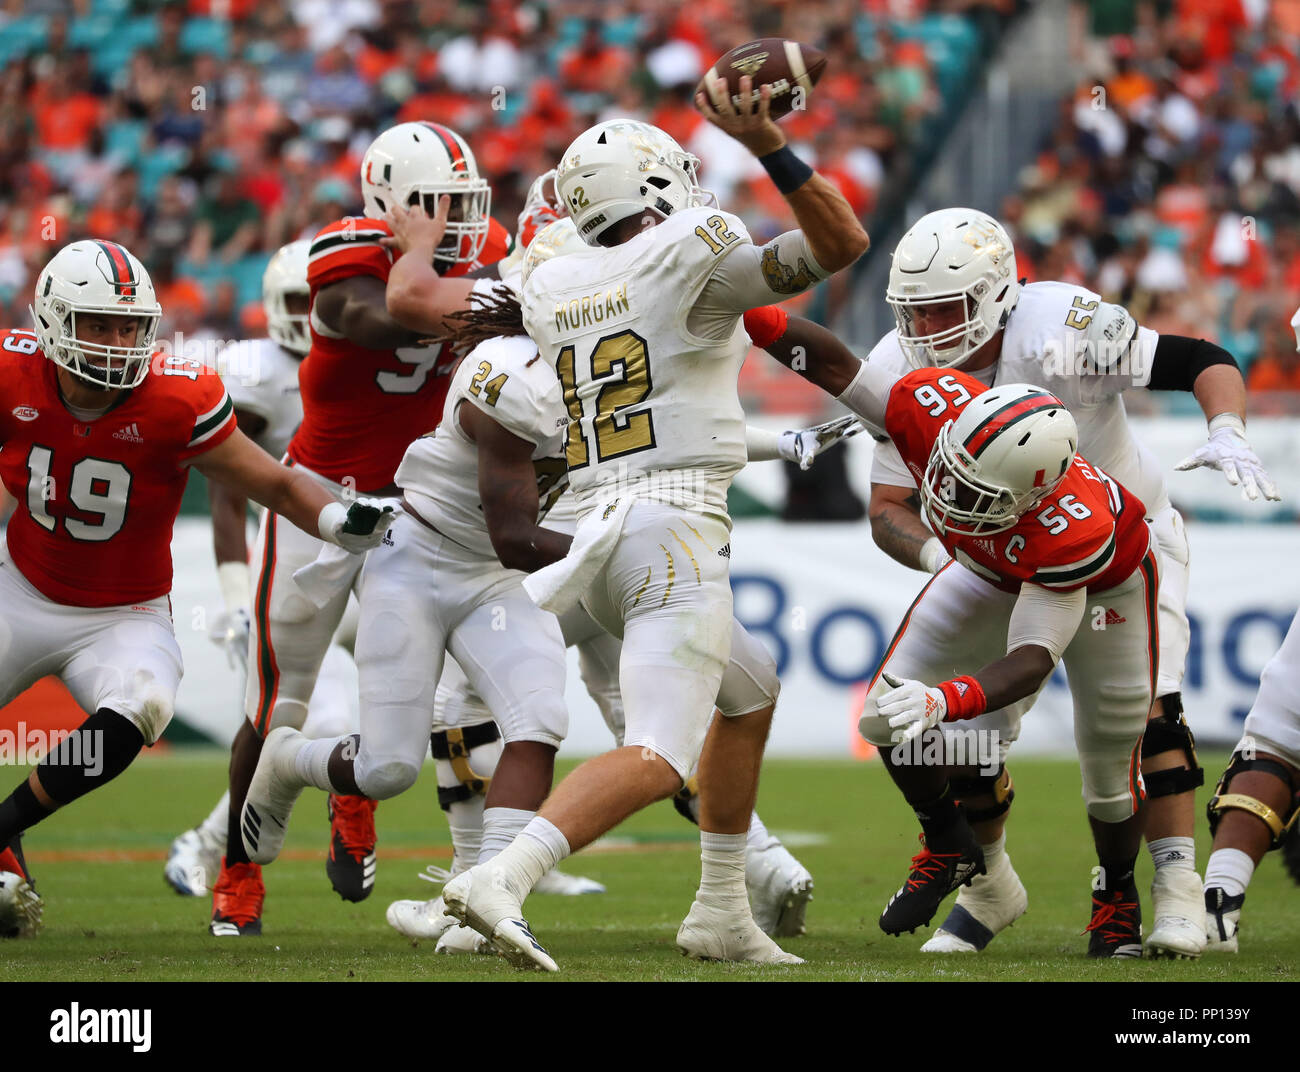 miami-gardens-florida-usa-22nd-sep-2018-fiu-panthers-quarterback-james-morgan-12-throws-the-ball-during-the-college-football-game-between-the-fiu-panthers-and-the-miami-hurricanes-at-the-hard-rock-stadium-in-miami-gardens-florida-the-hurricanes-won-31-17-mario-houbencsmalamy-live-news-credit-cal-sport-mediaalamy-live-news-PP139Y.jpg